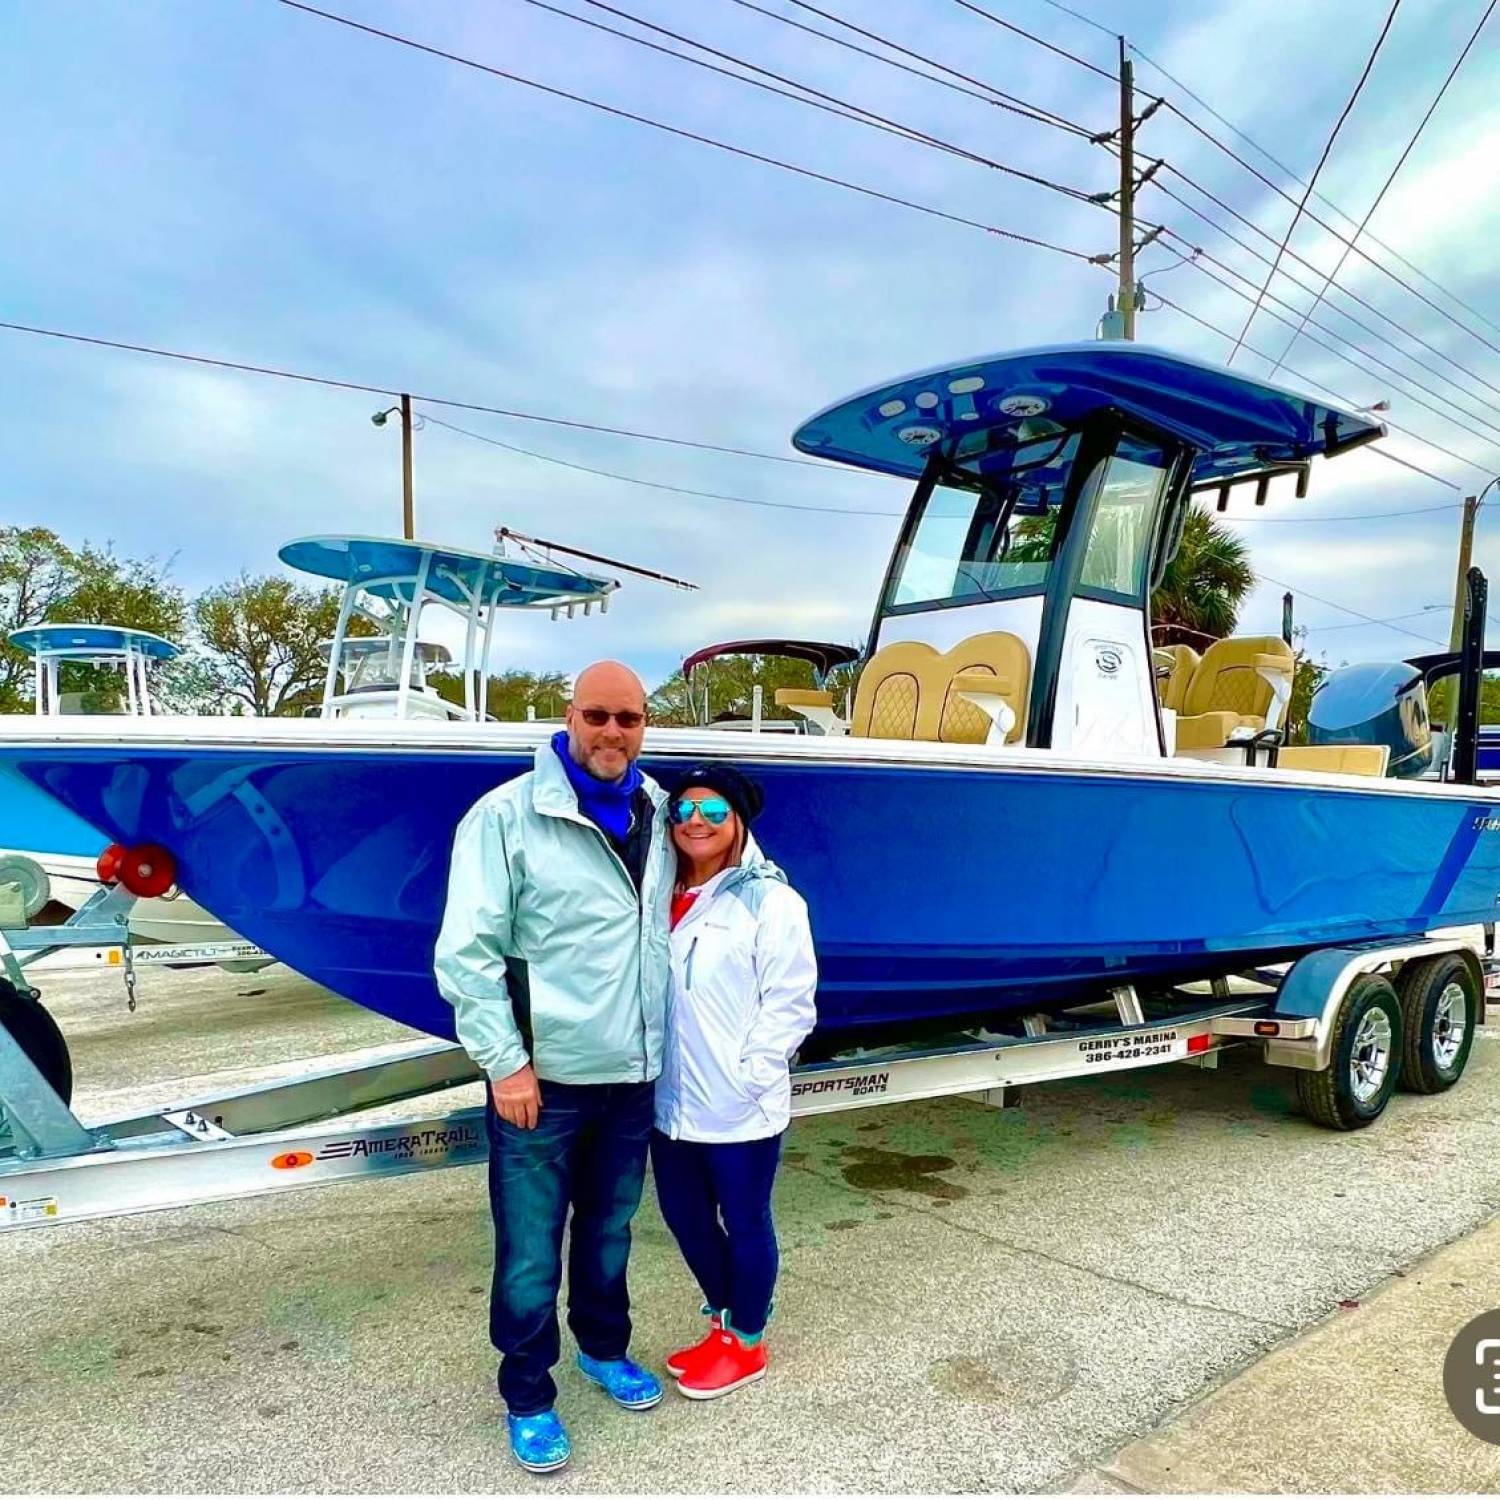 Title: Picking up our beauty - On board their Sportsman Masters 247OE Bay Boat - Location: New Smyrna. Participating in the Photo Contest #SportsmanMarch2023